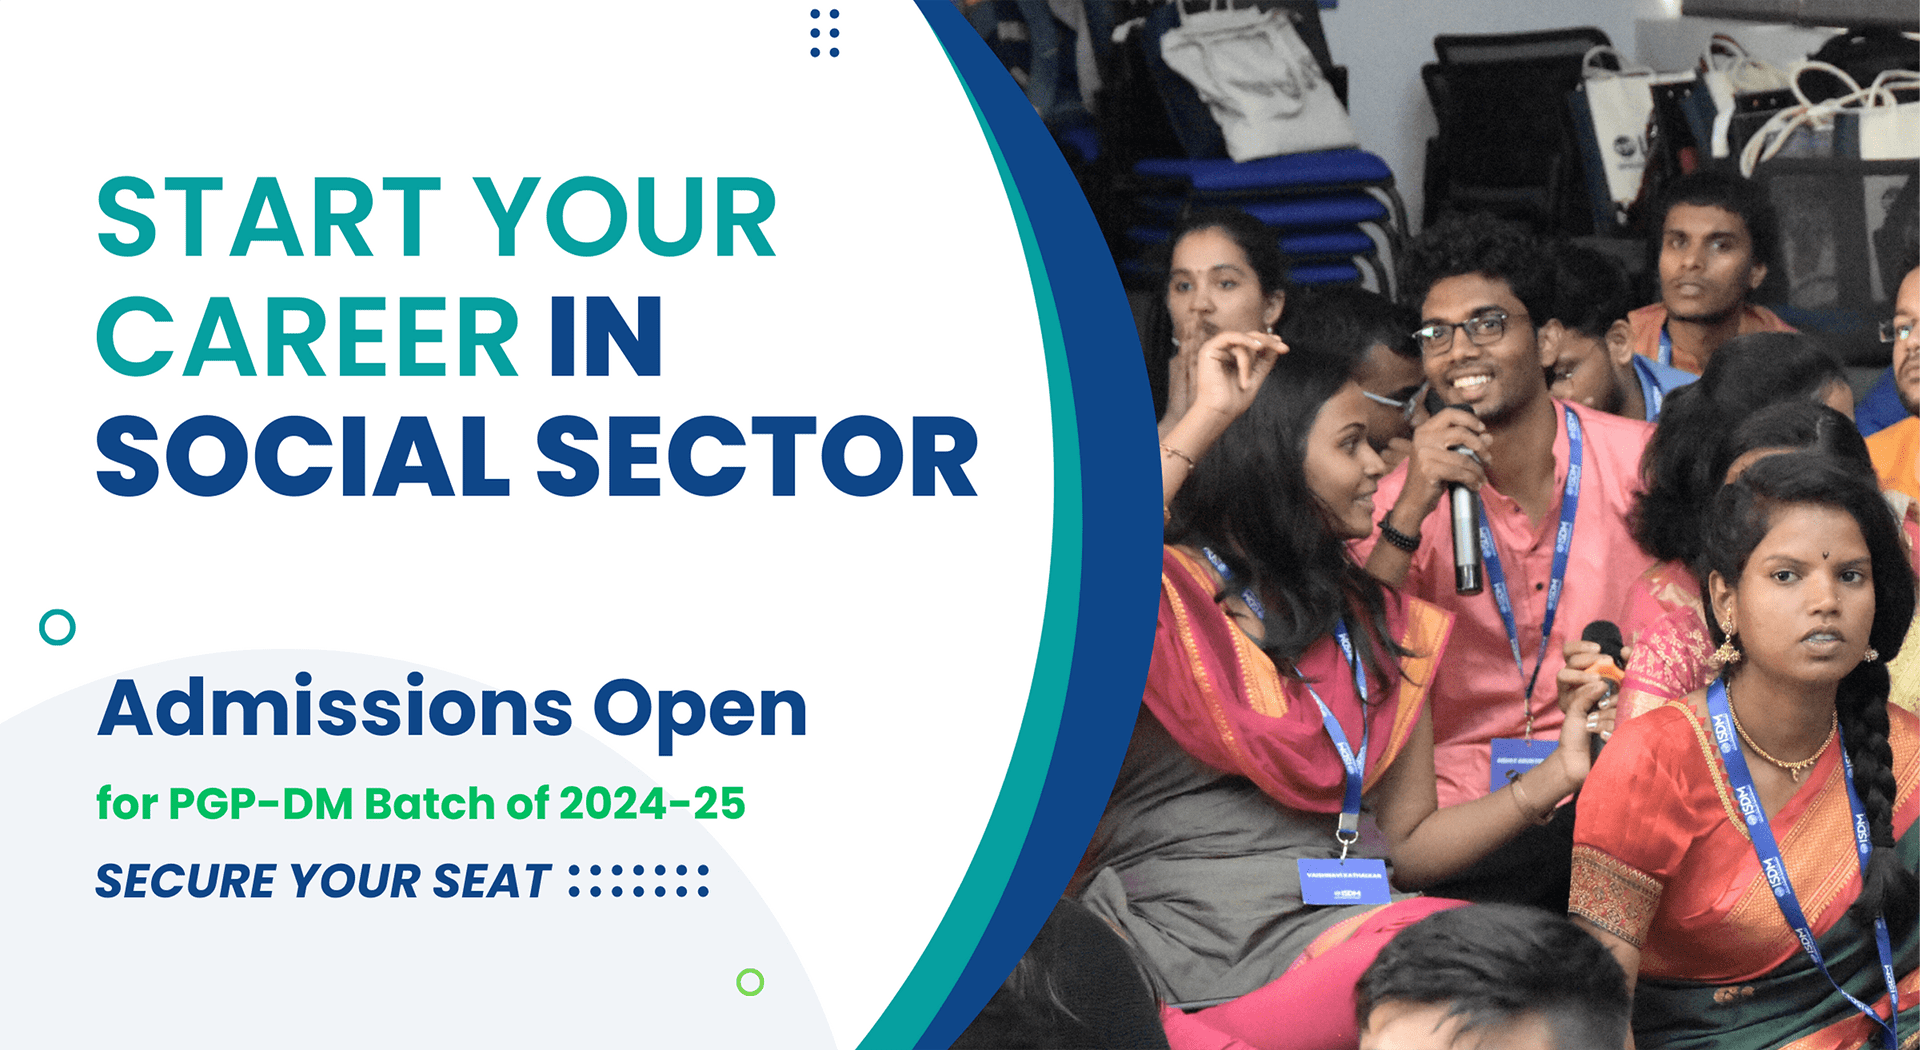 Start your Career in Social Sector